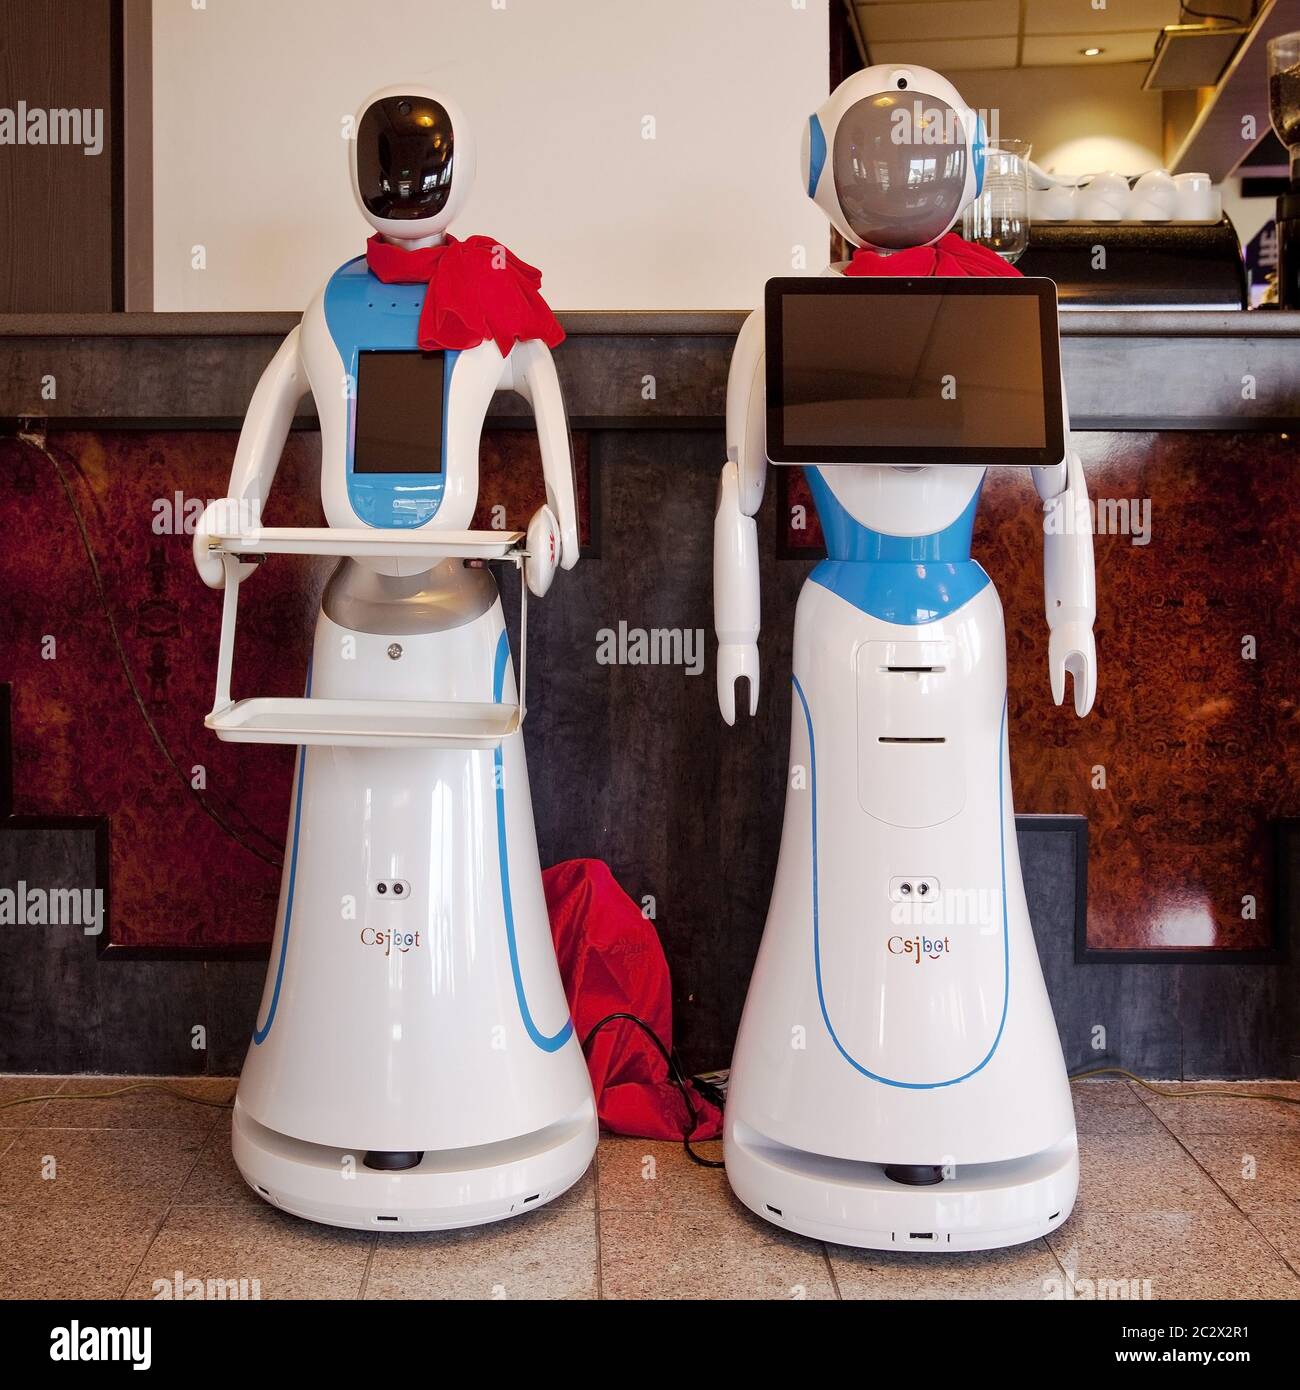 service robots in a Chinese restaurant, Germany, Europe Stock Photo